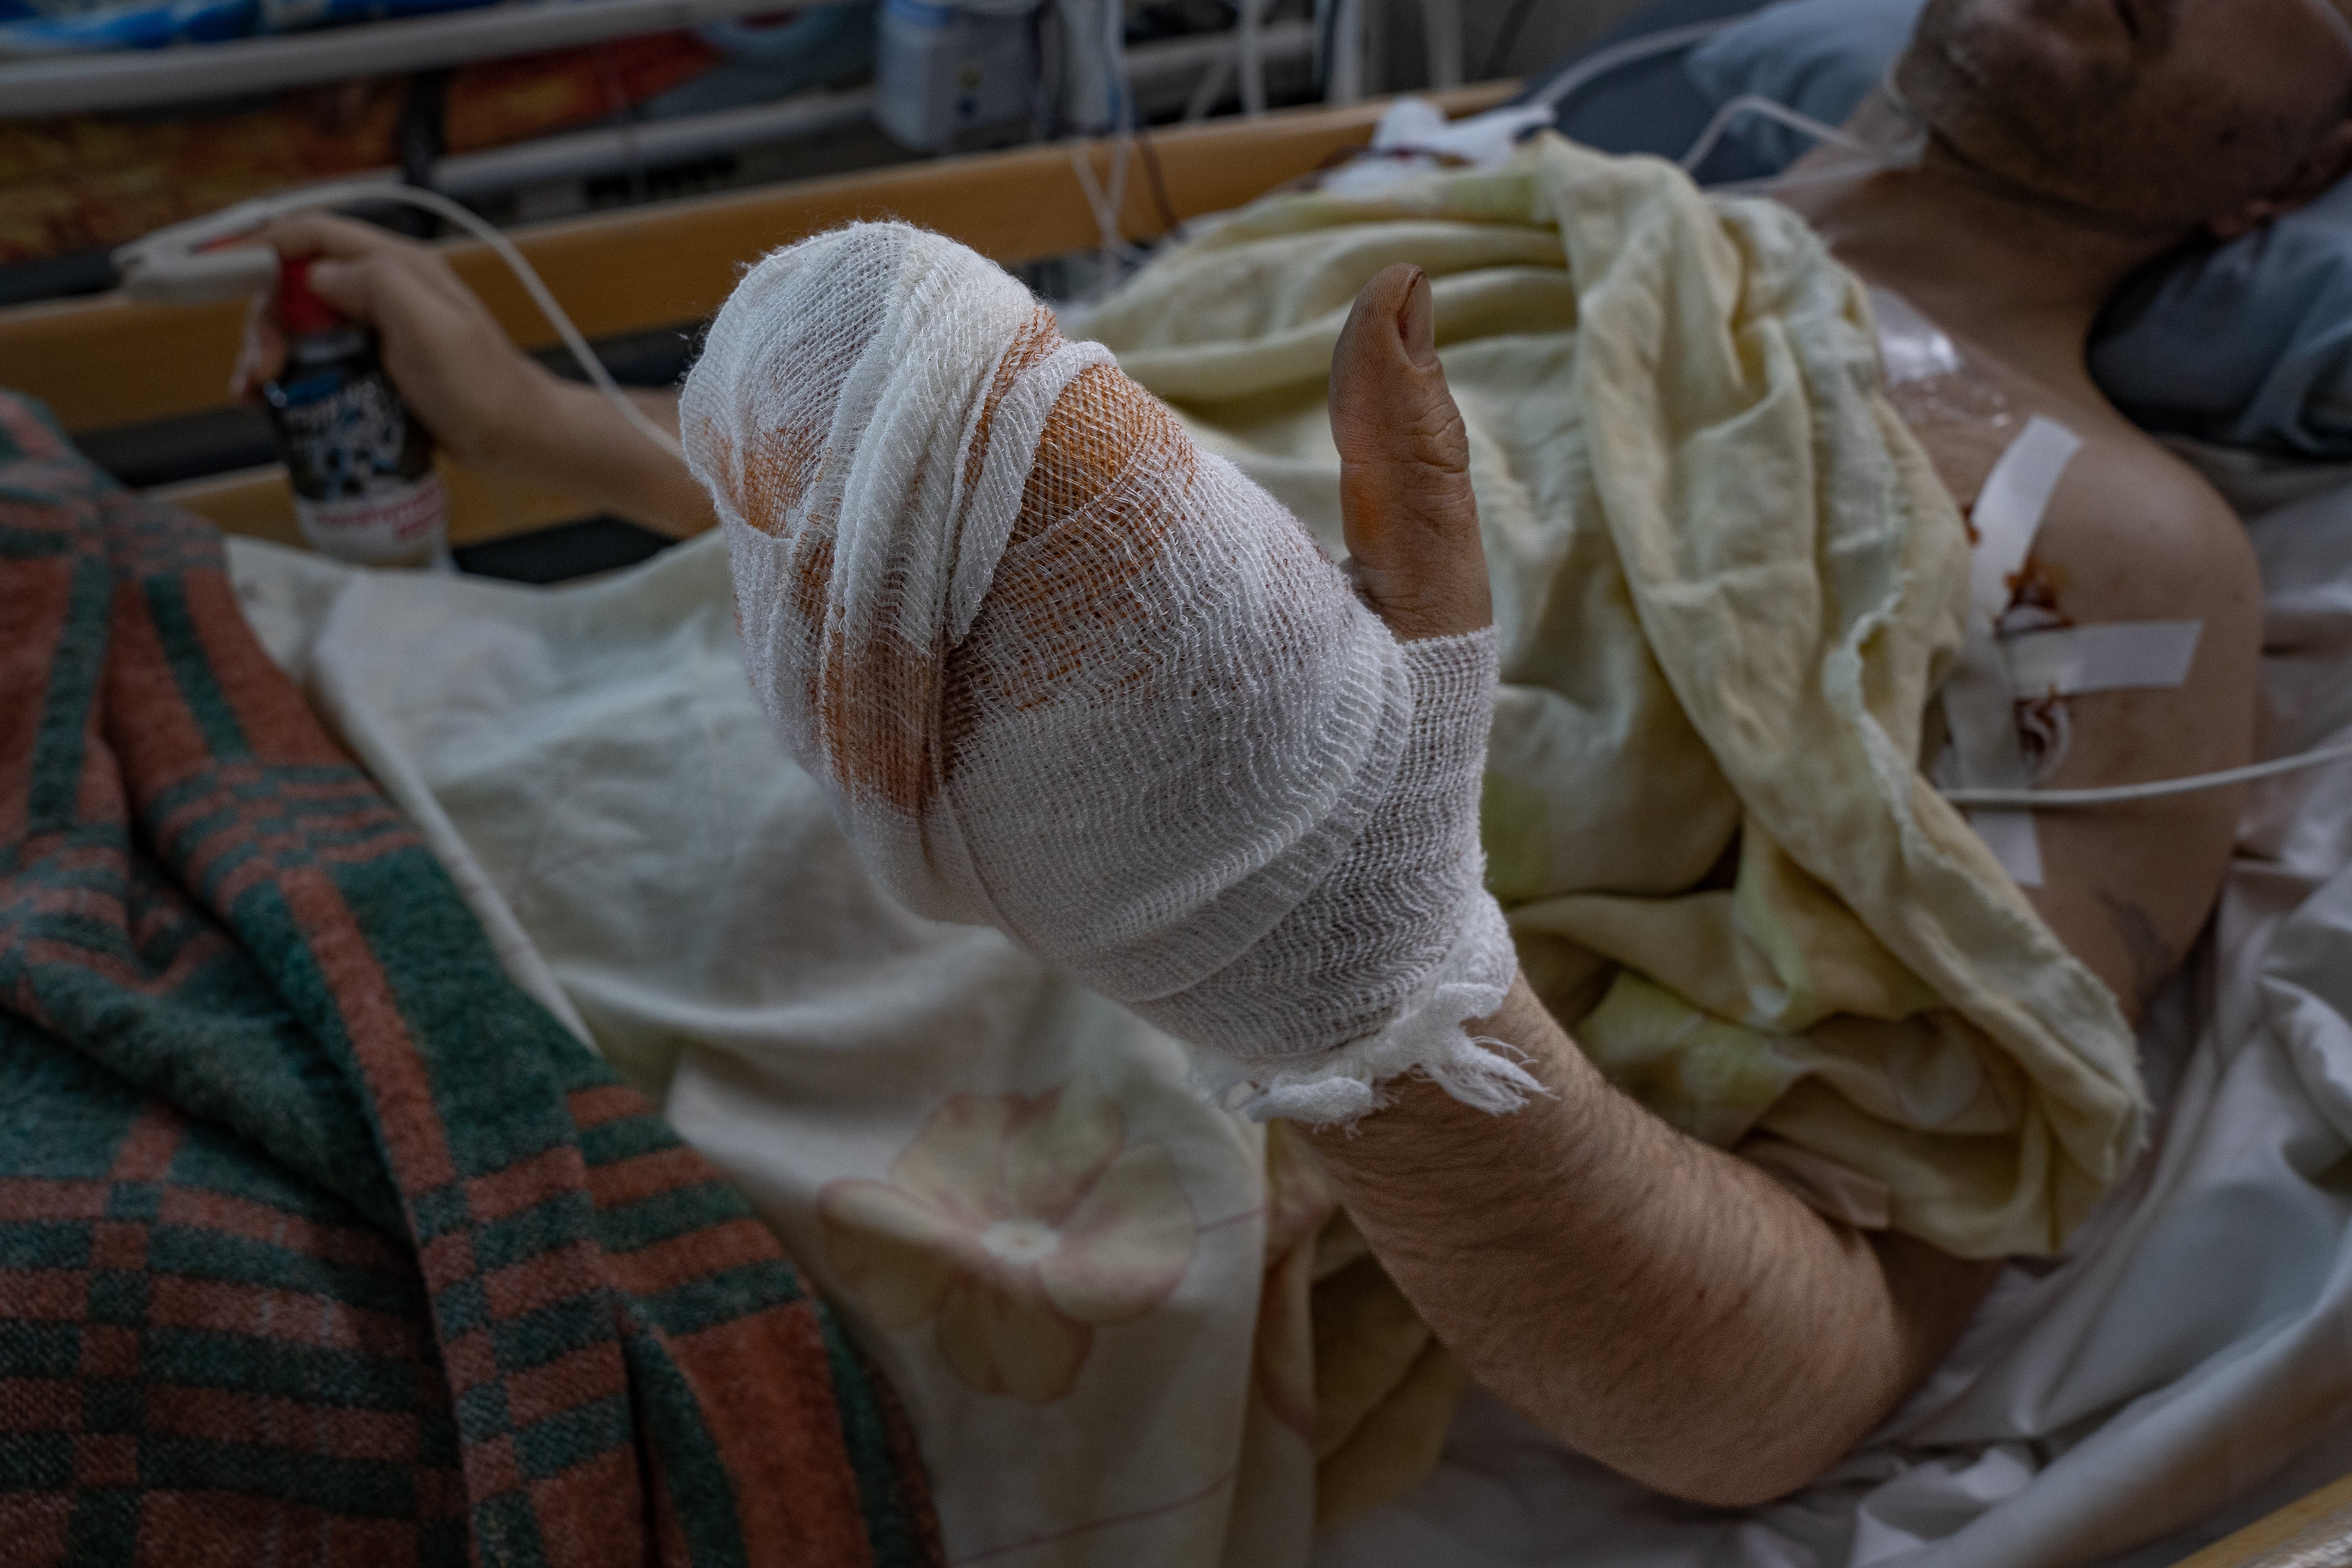 Dima, who picked up an unexploded cluster bomblet, shows how part of his hand is now missing while recovering in a hospital in Mykolaiv